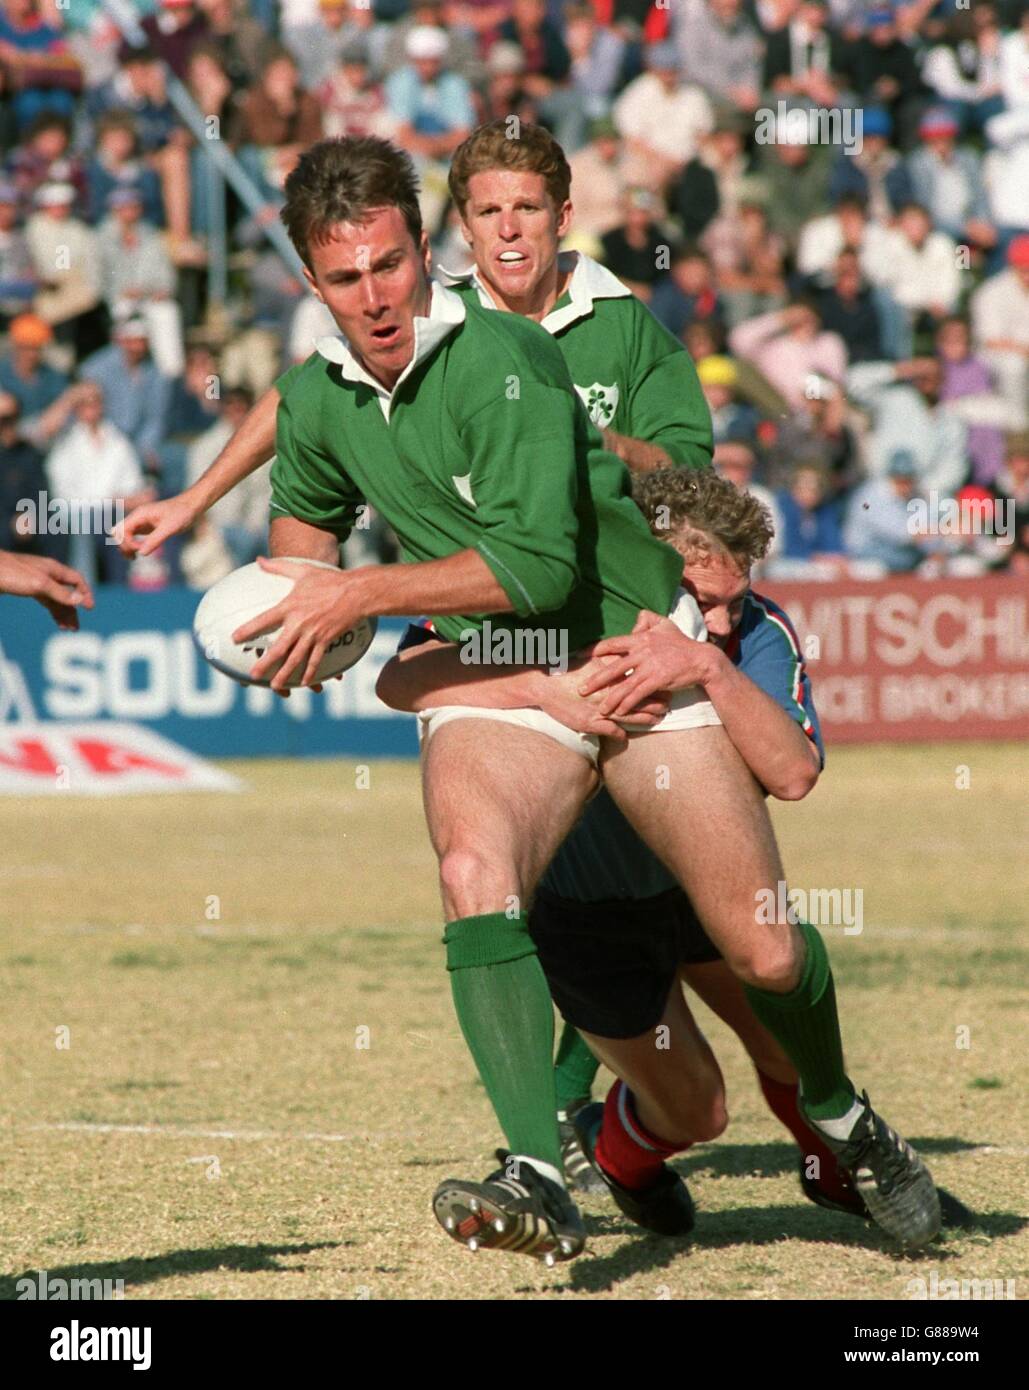 Union Rugby - 1st Test - Windhoek Rugby Stadium - Namibia v Ireland. Ireland's Jim Staples breaks away with the ball as team mate Brendan Mullin looks on Stock Photo